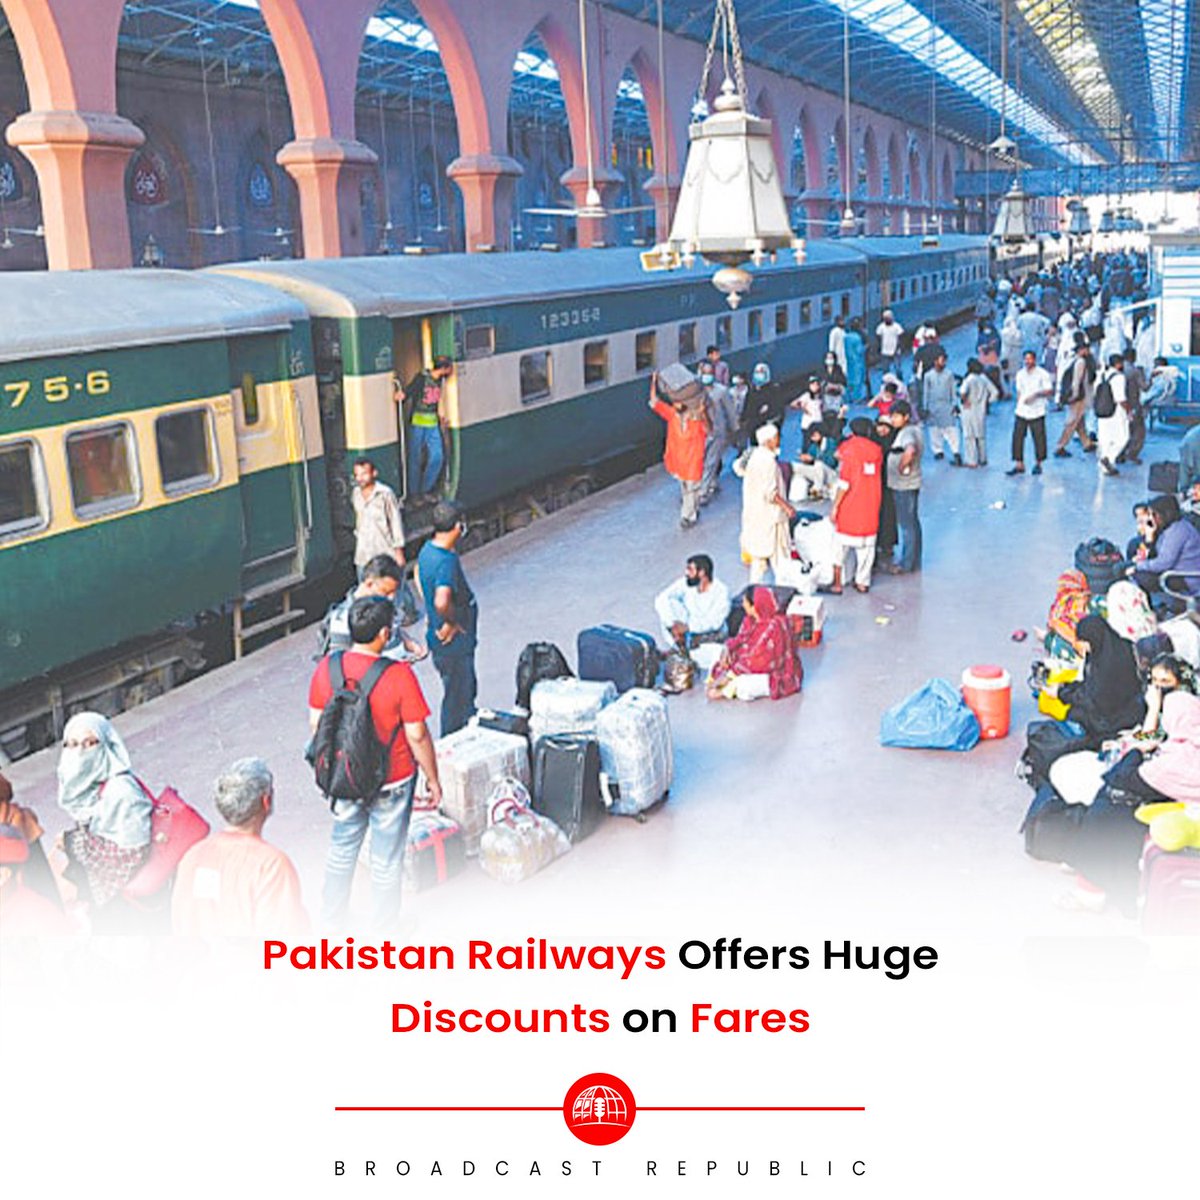 Pakistan Railways has announced a generous 33% discount on all train classes for passengers traveling during the Eid-ul-Fitr holidays, until April 25th. 

#Pakistan #PakistanRailwayStation #EidMubarak #EidDiscount